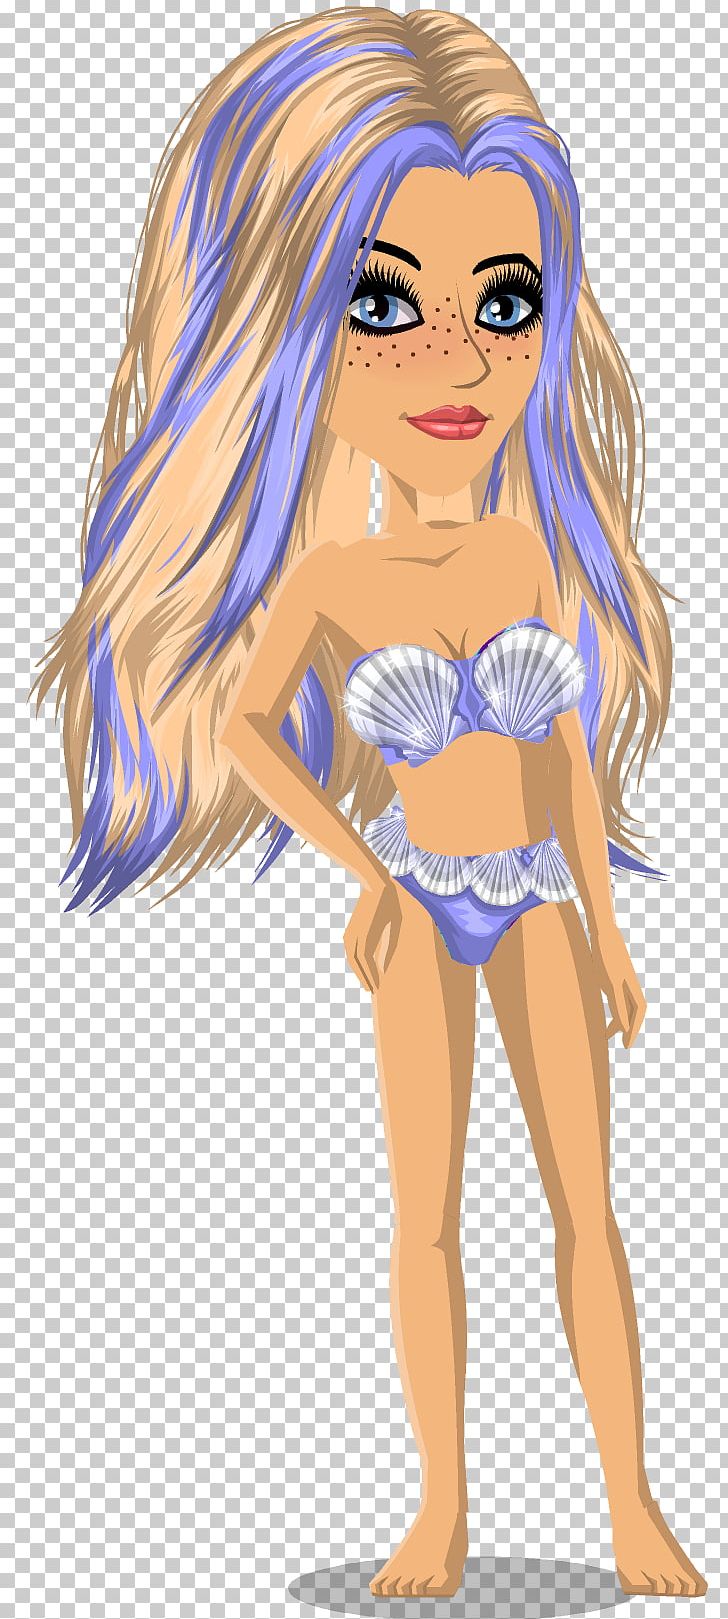 MovieStarPlanet Fairy The Little Mermaid Illustration PNG, Clipart, Anime, Art, Avatar, Brown Hair, Cartoon Free PNG Download